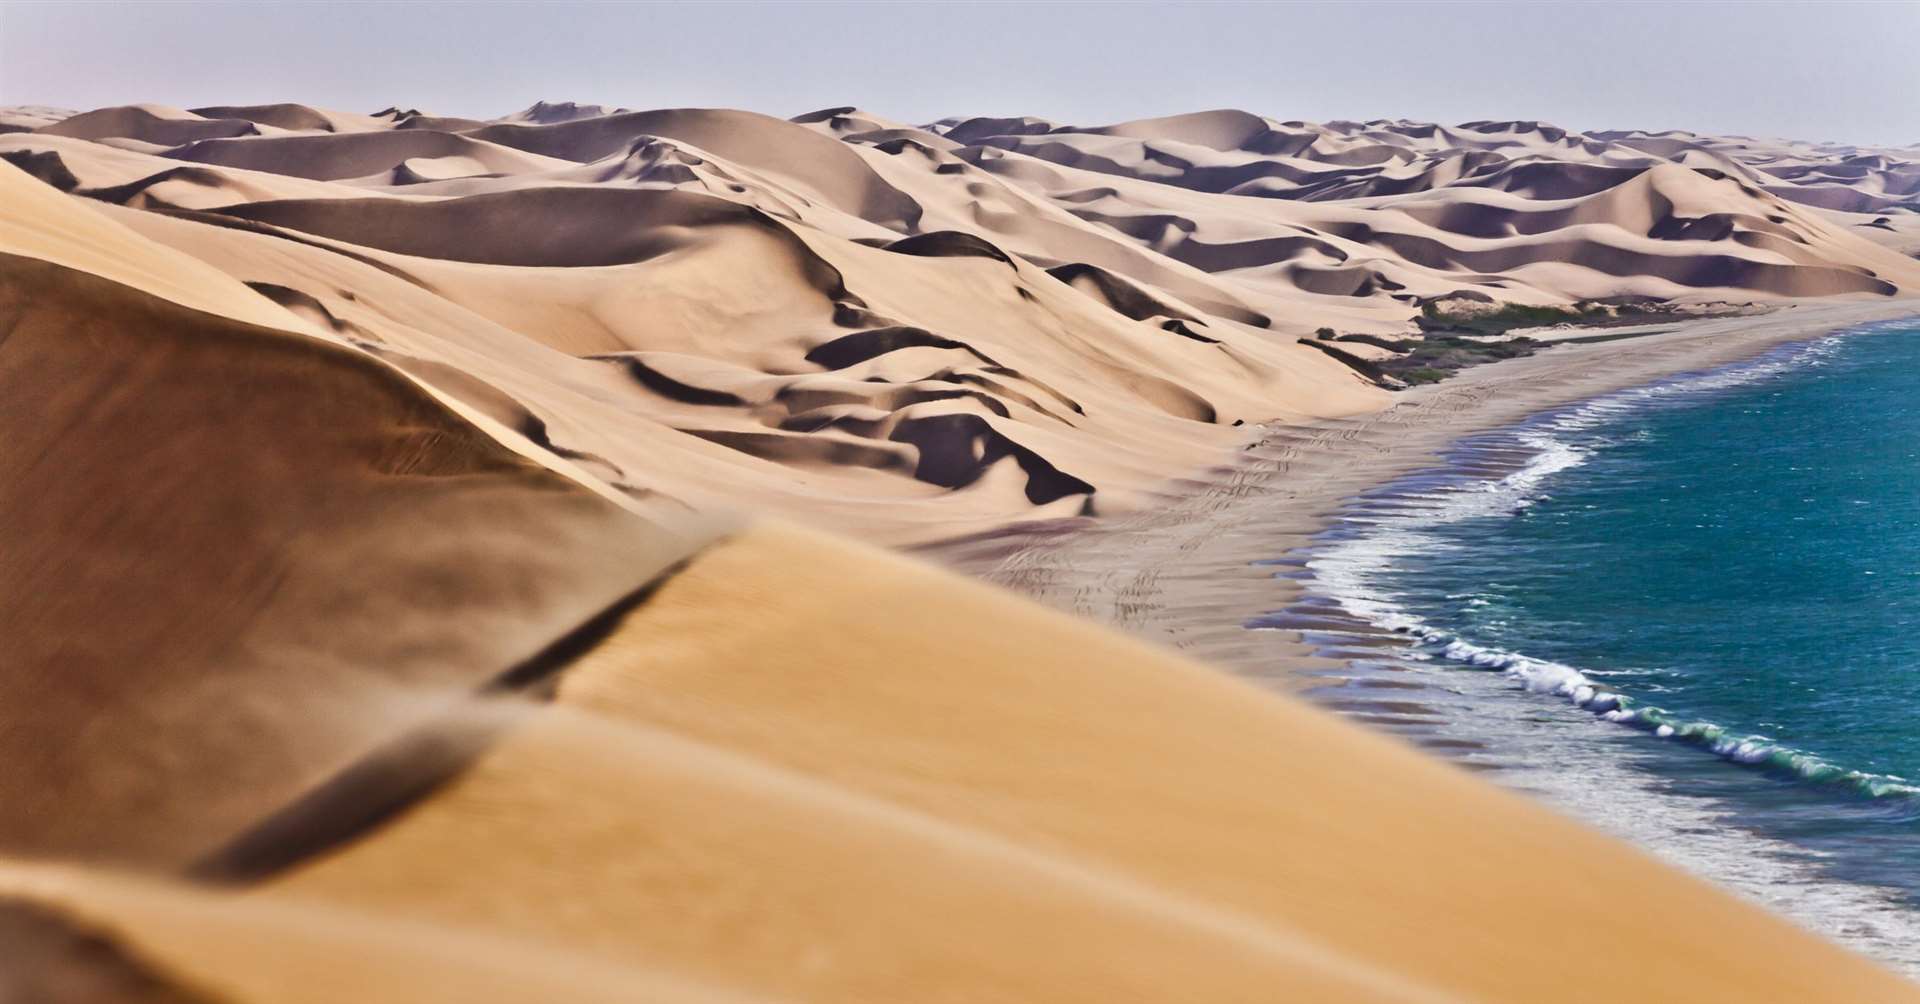 The world's oldest desert, the Namib Desert has existed for at least 55 million years, completely devoid of surface water but bisected by several dry riverbeds.